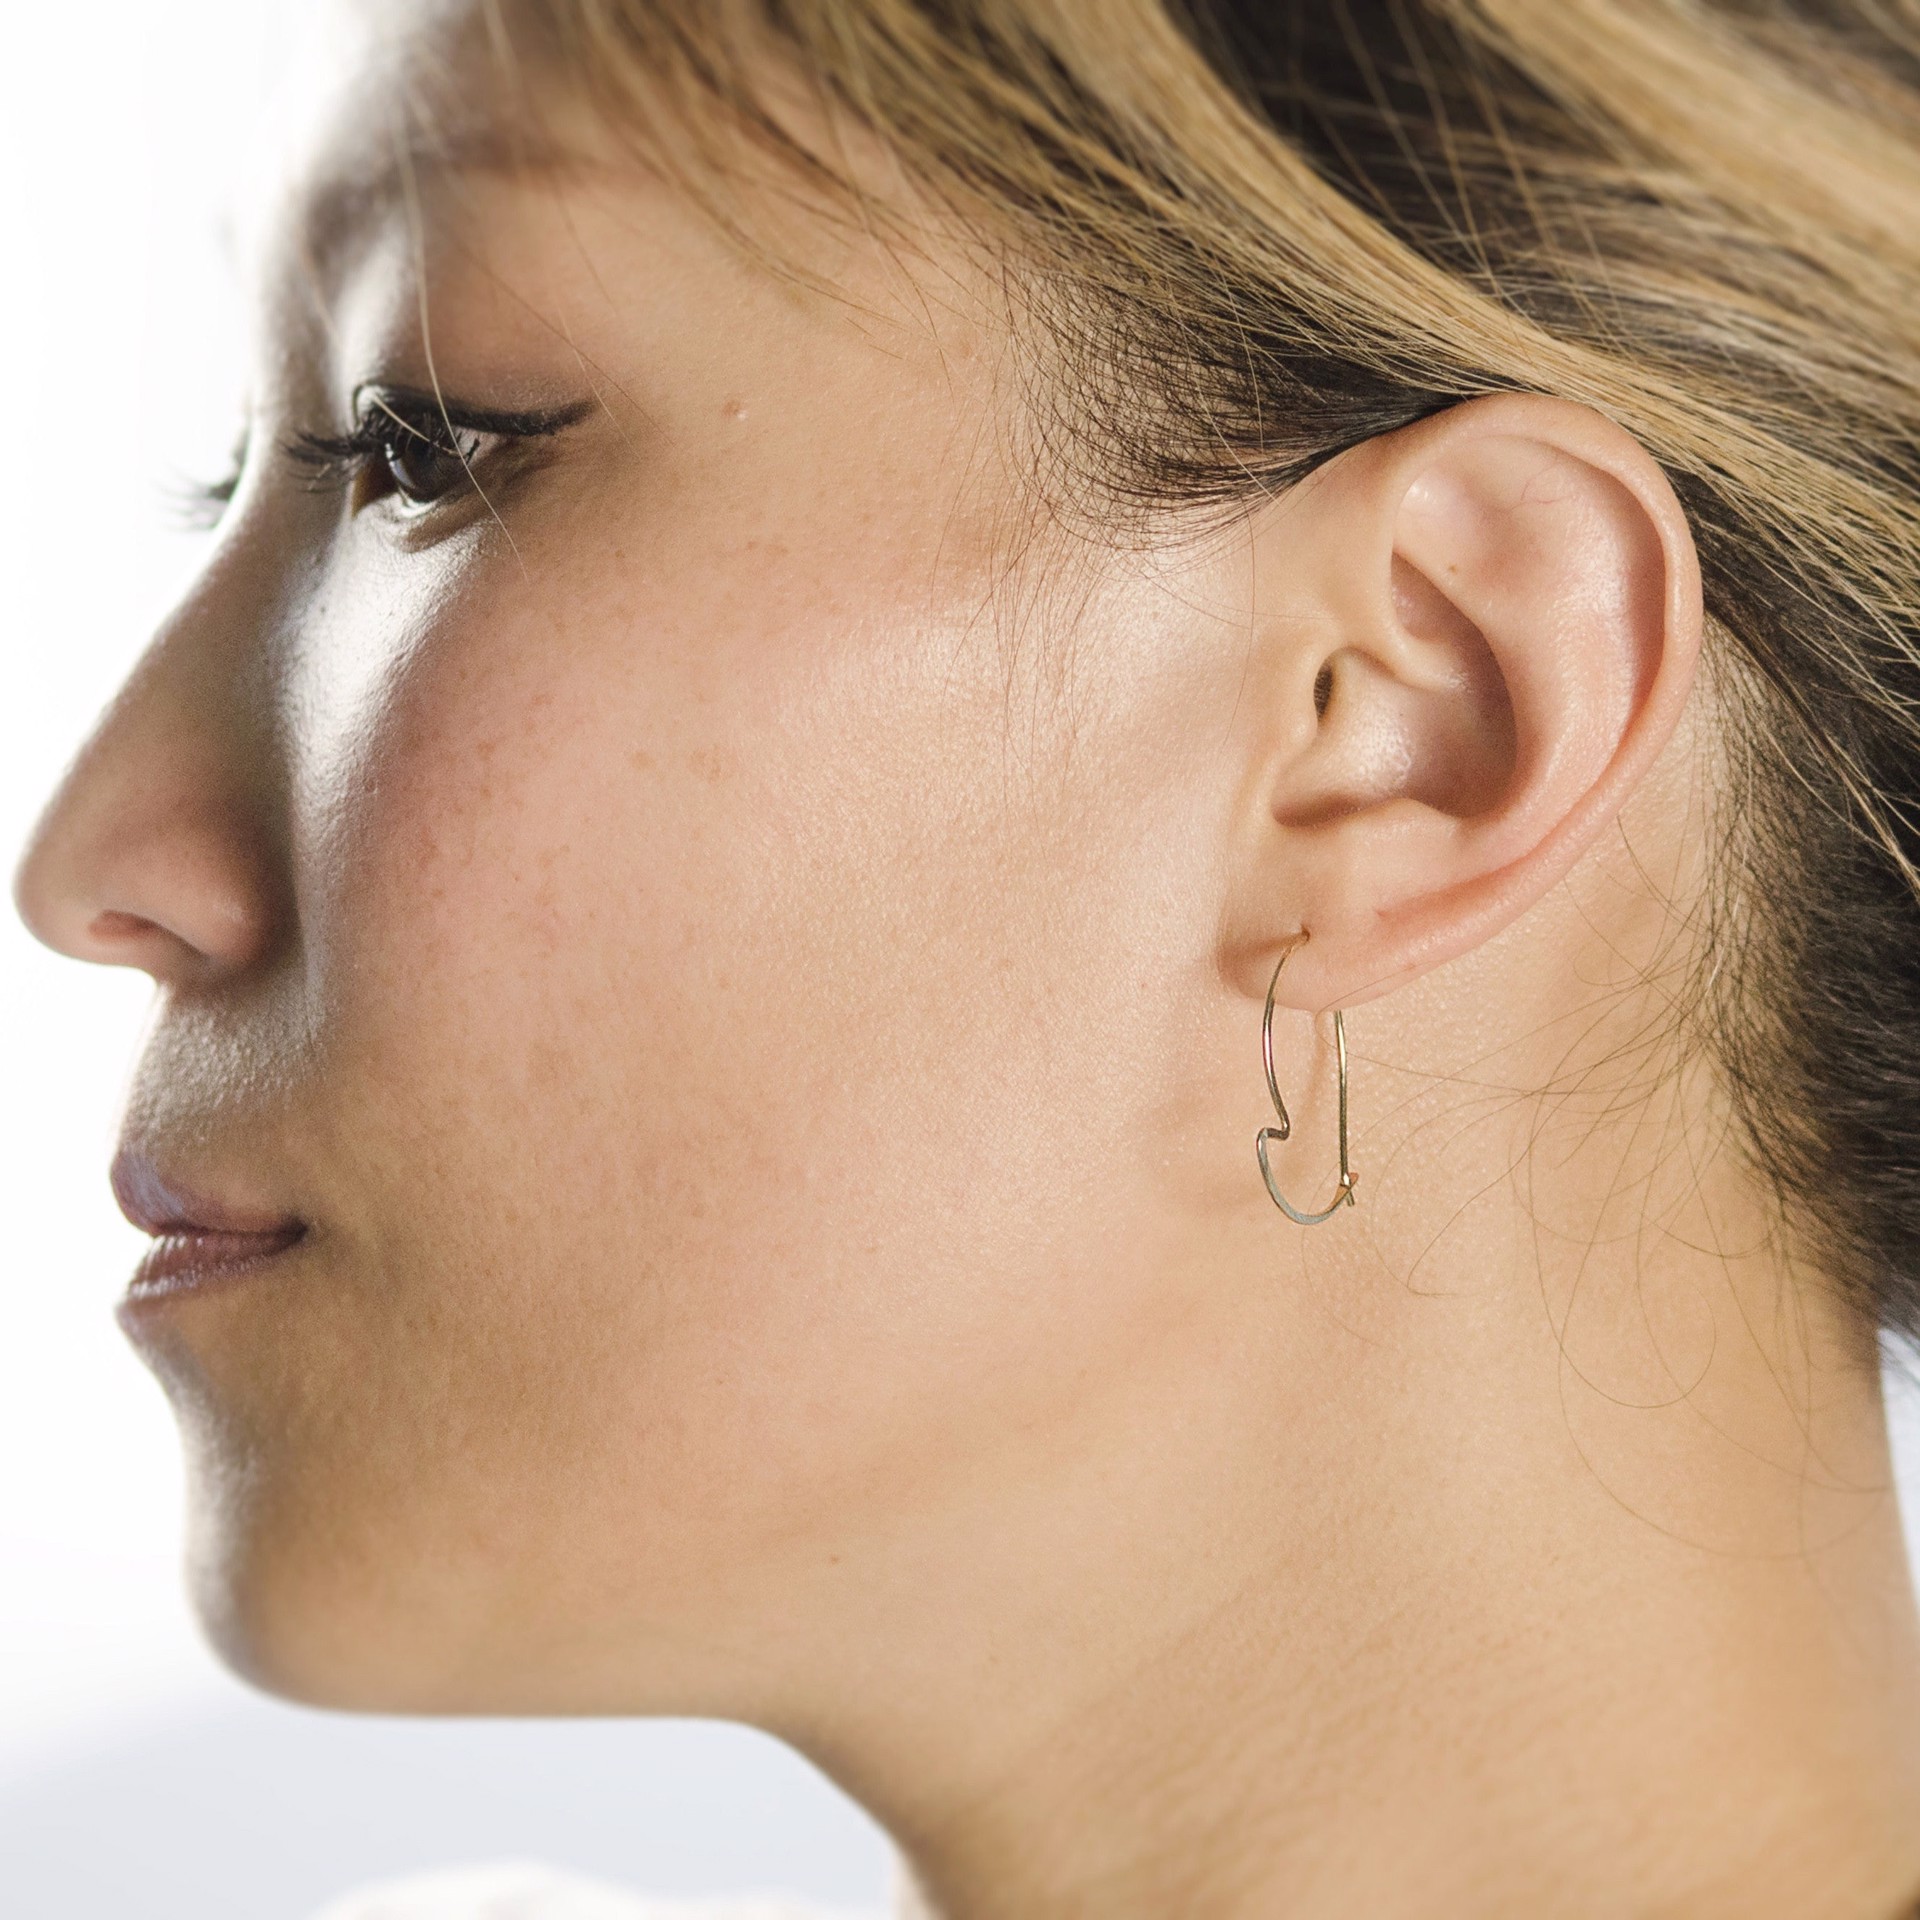 Pi Earrings  -  Leaf by Clementine & Co. Jewelry